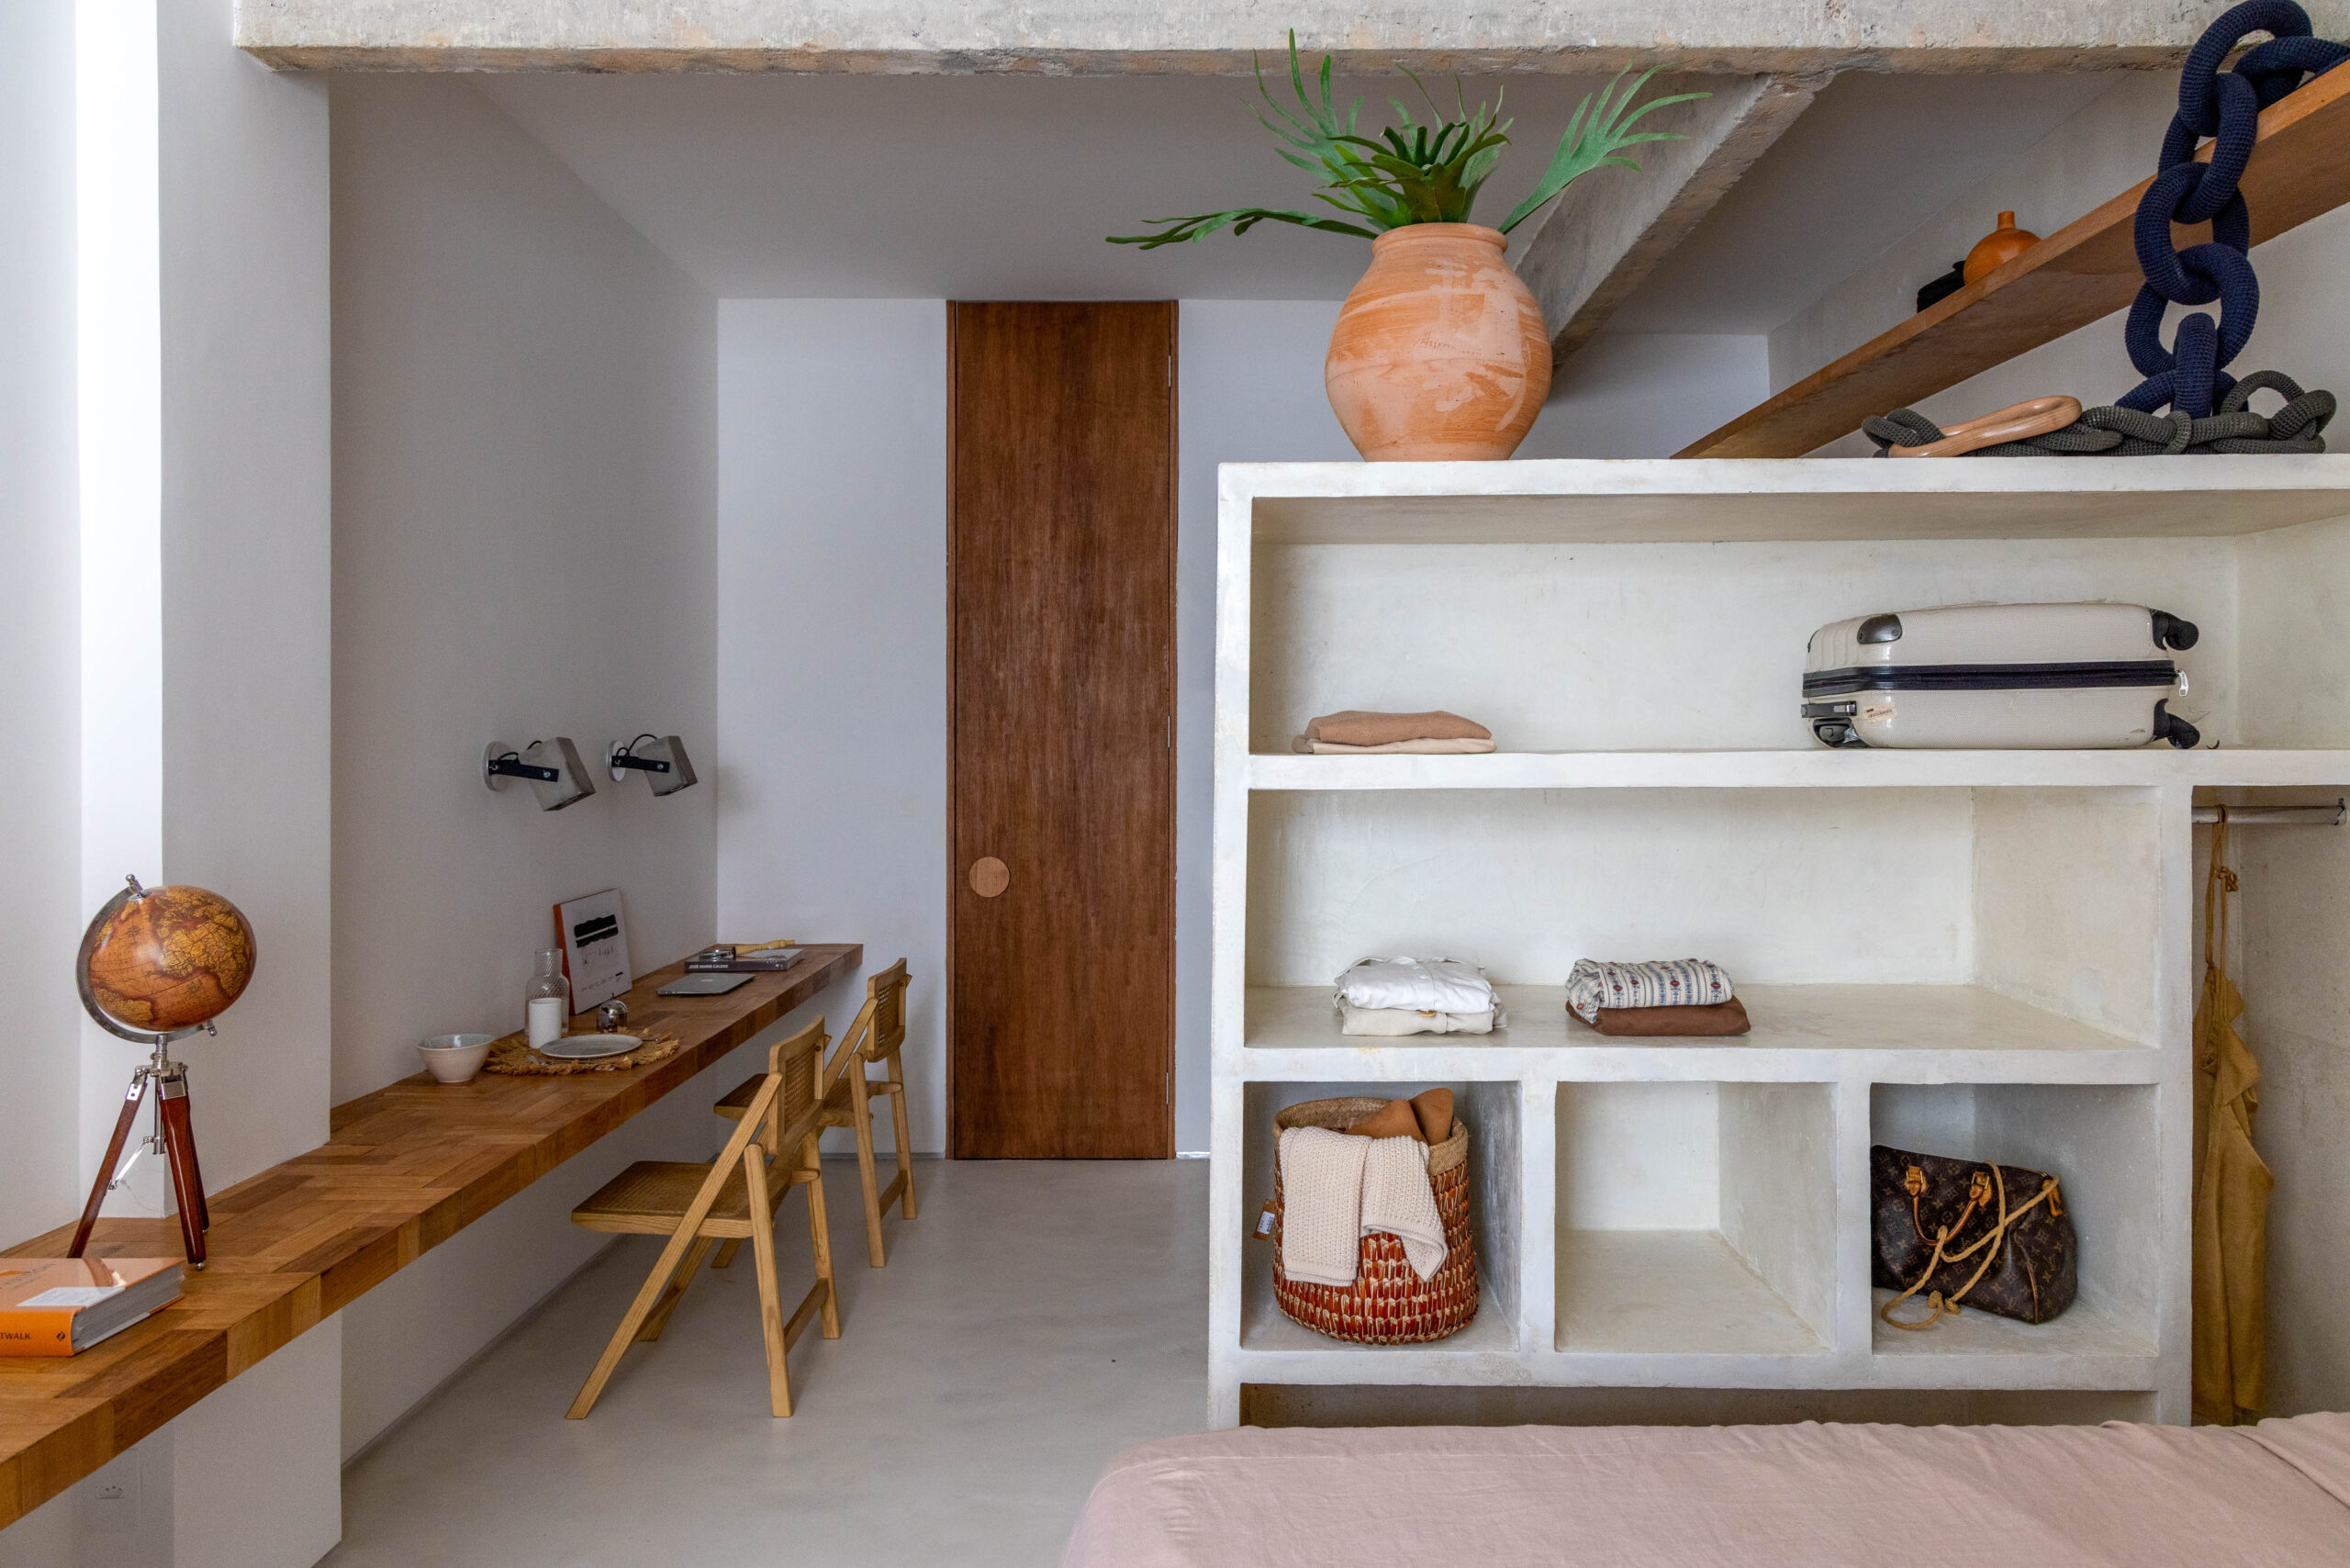 This 291-square-foot Brazilian pied-à-terre was inspired by Greece